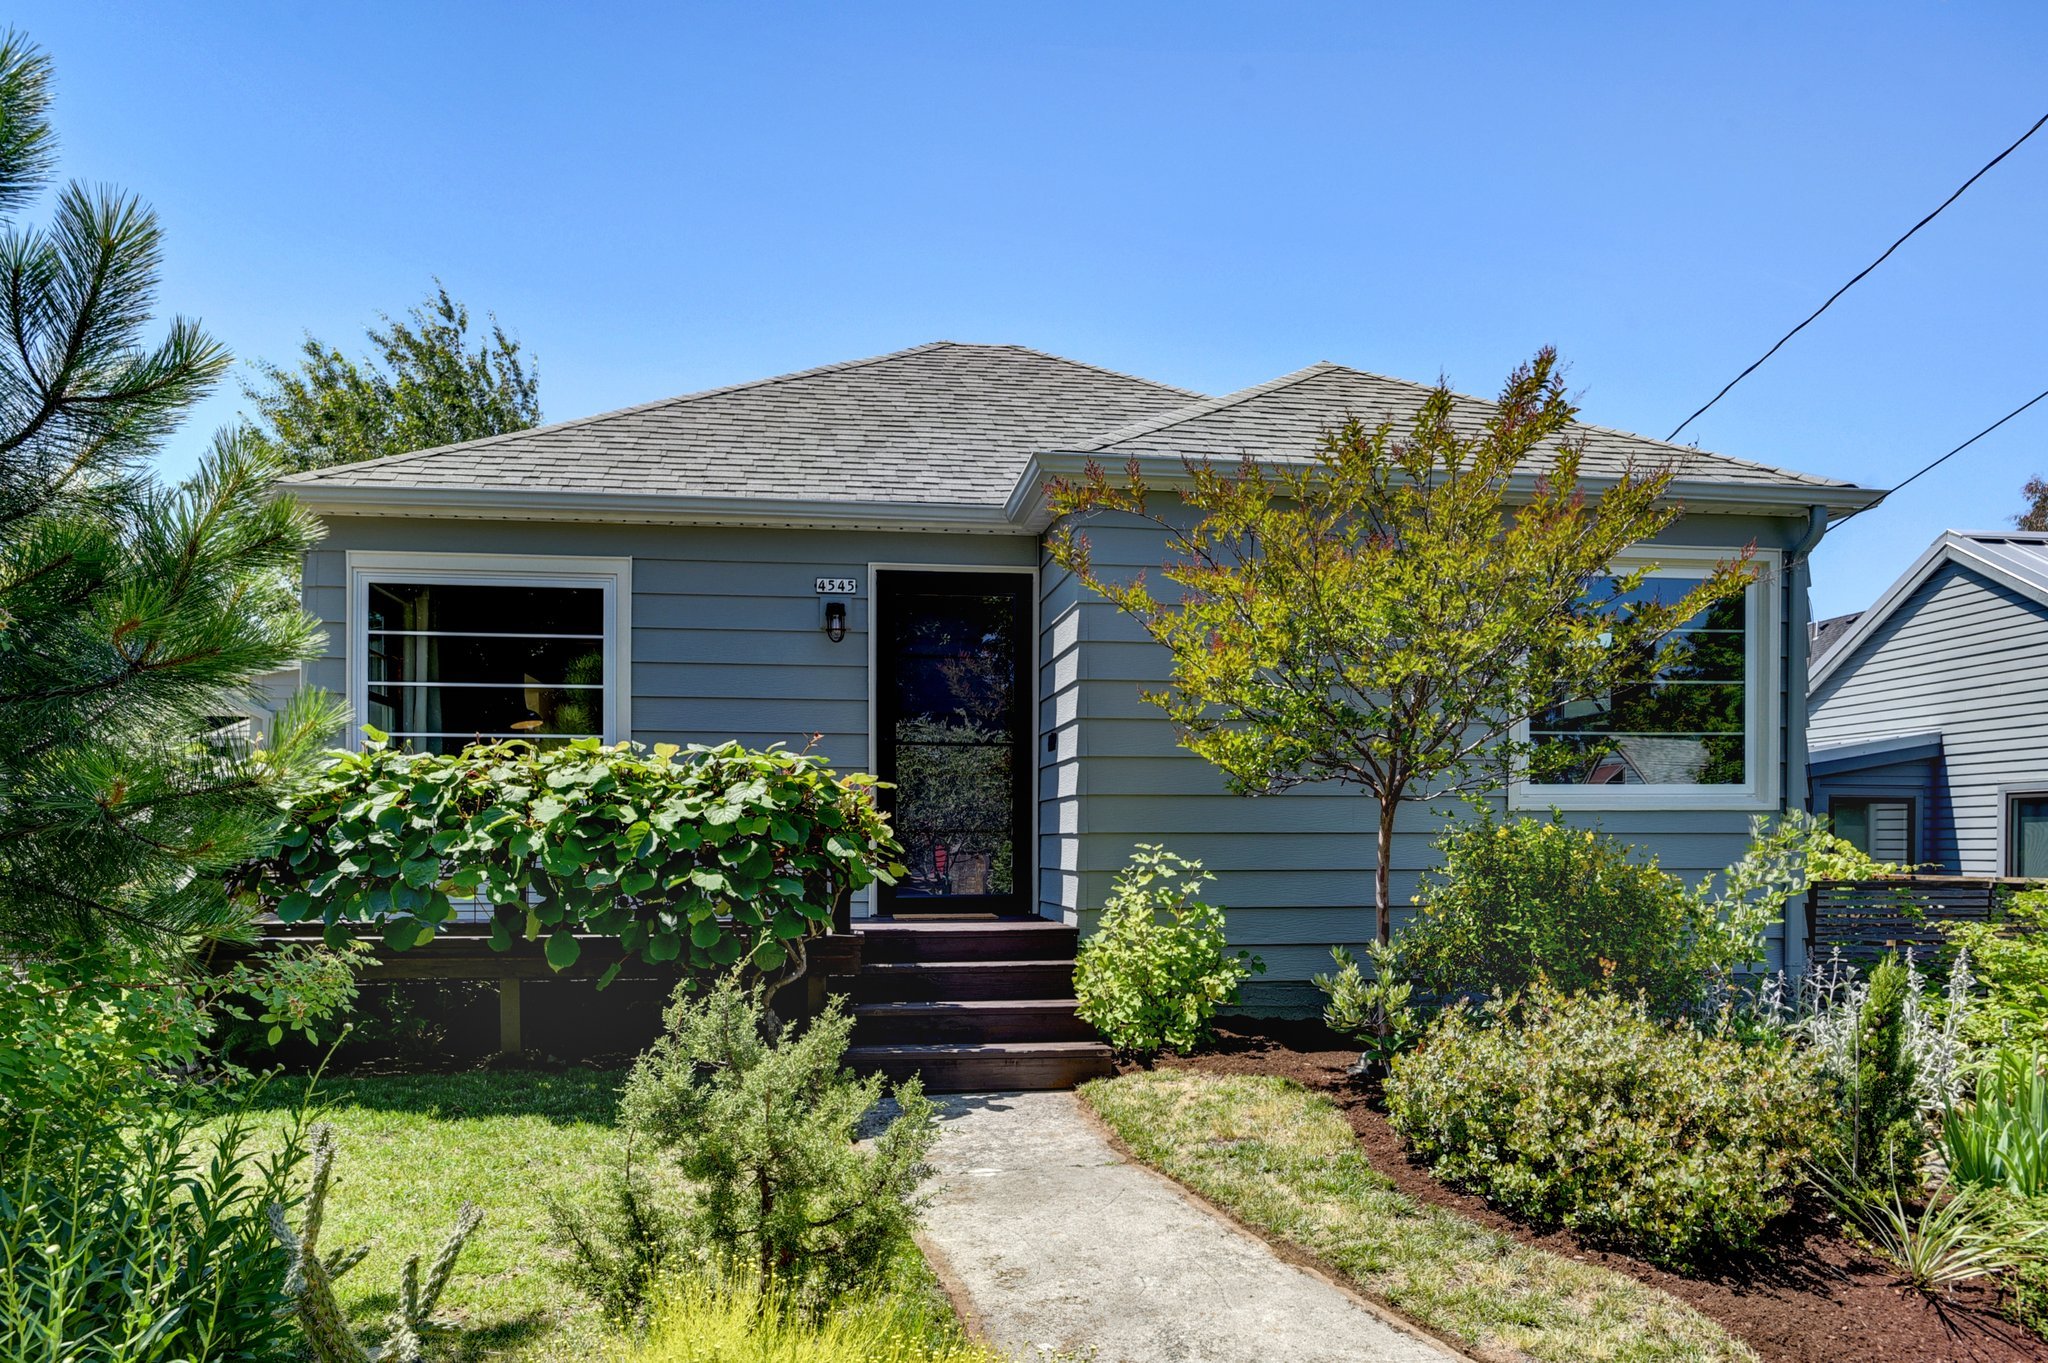 4545 NE 40th Ave. &lt;strong&gt;SOLD&lt;/strong&gt;